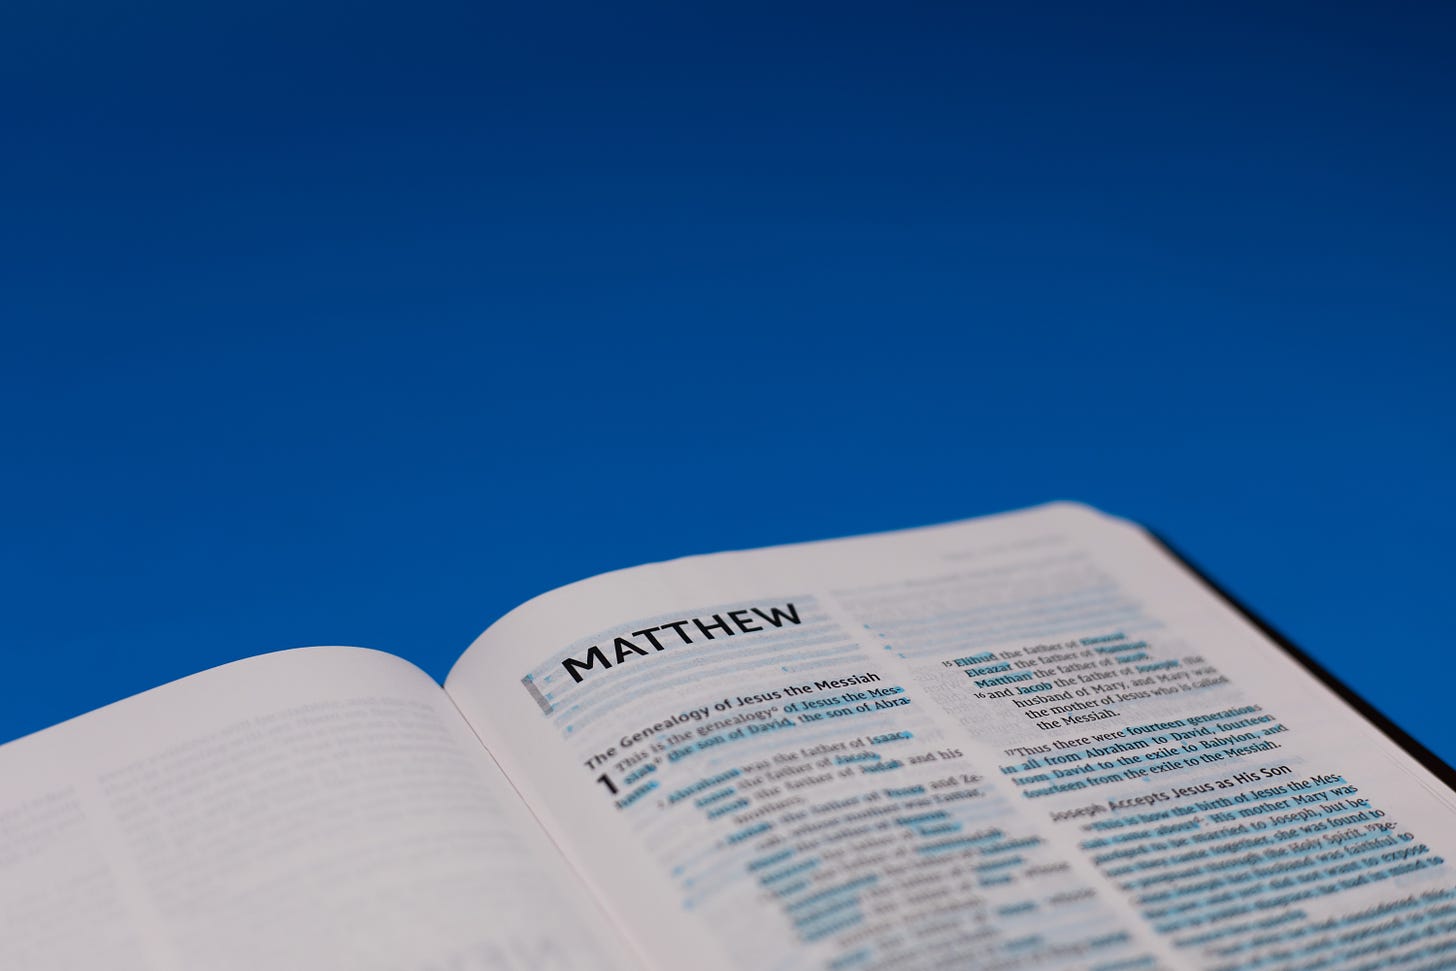 The Bible opened to Matthew against a blue background.